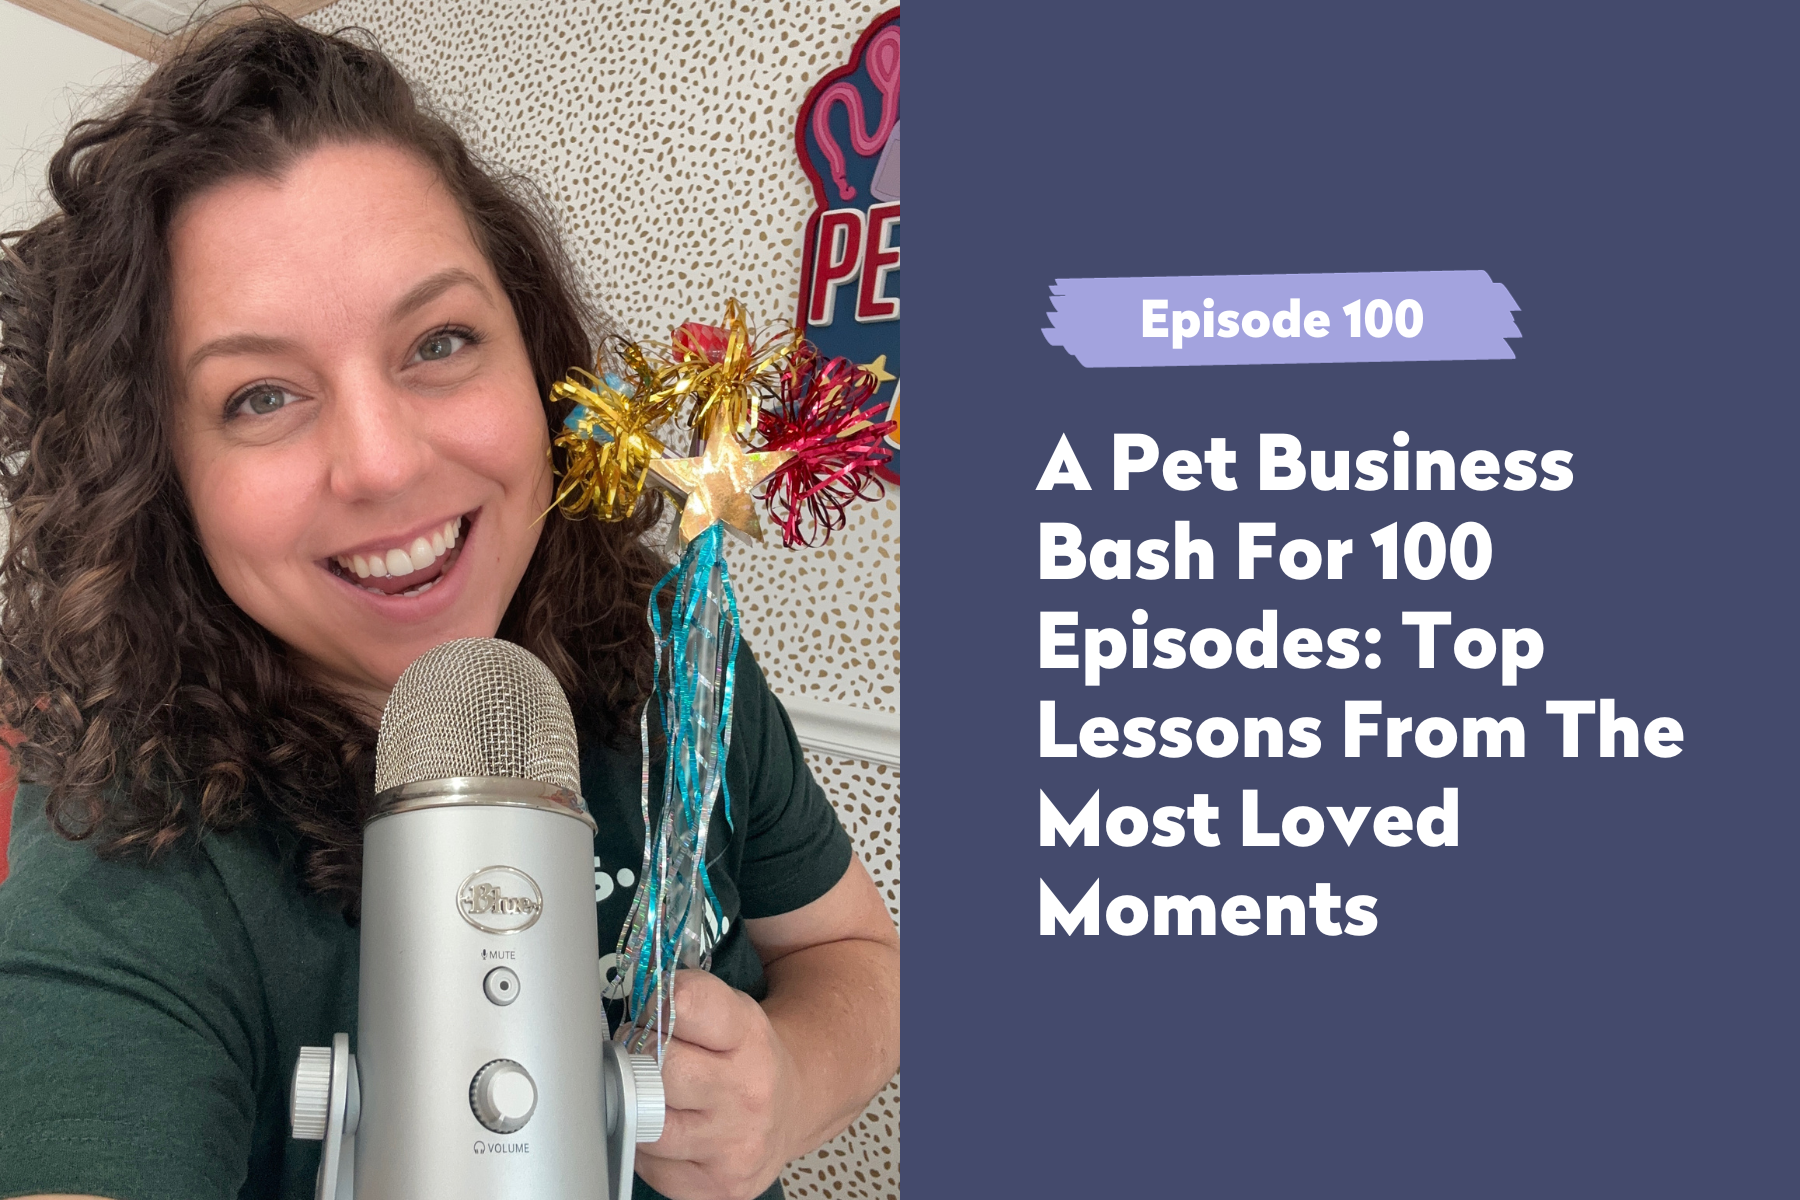 Episode 100 | A Pet Business Bash For 100 Episodes: Top Lessons From The Most Loved Moments